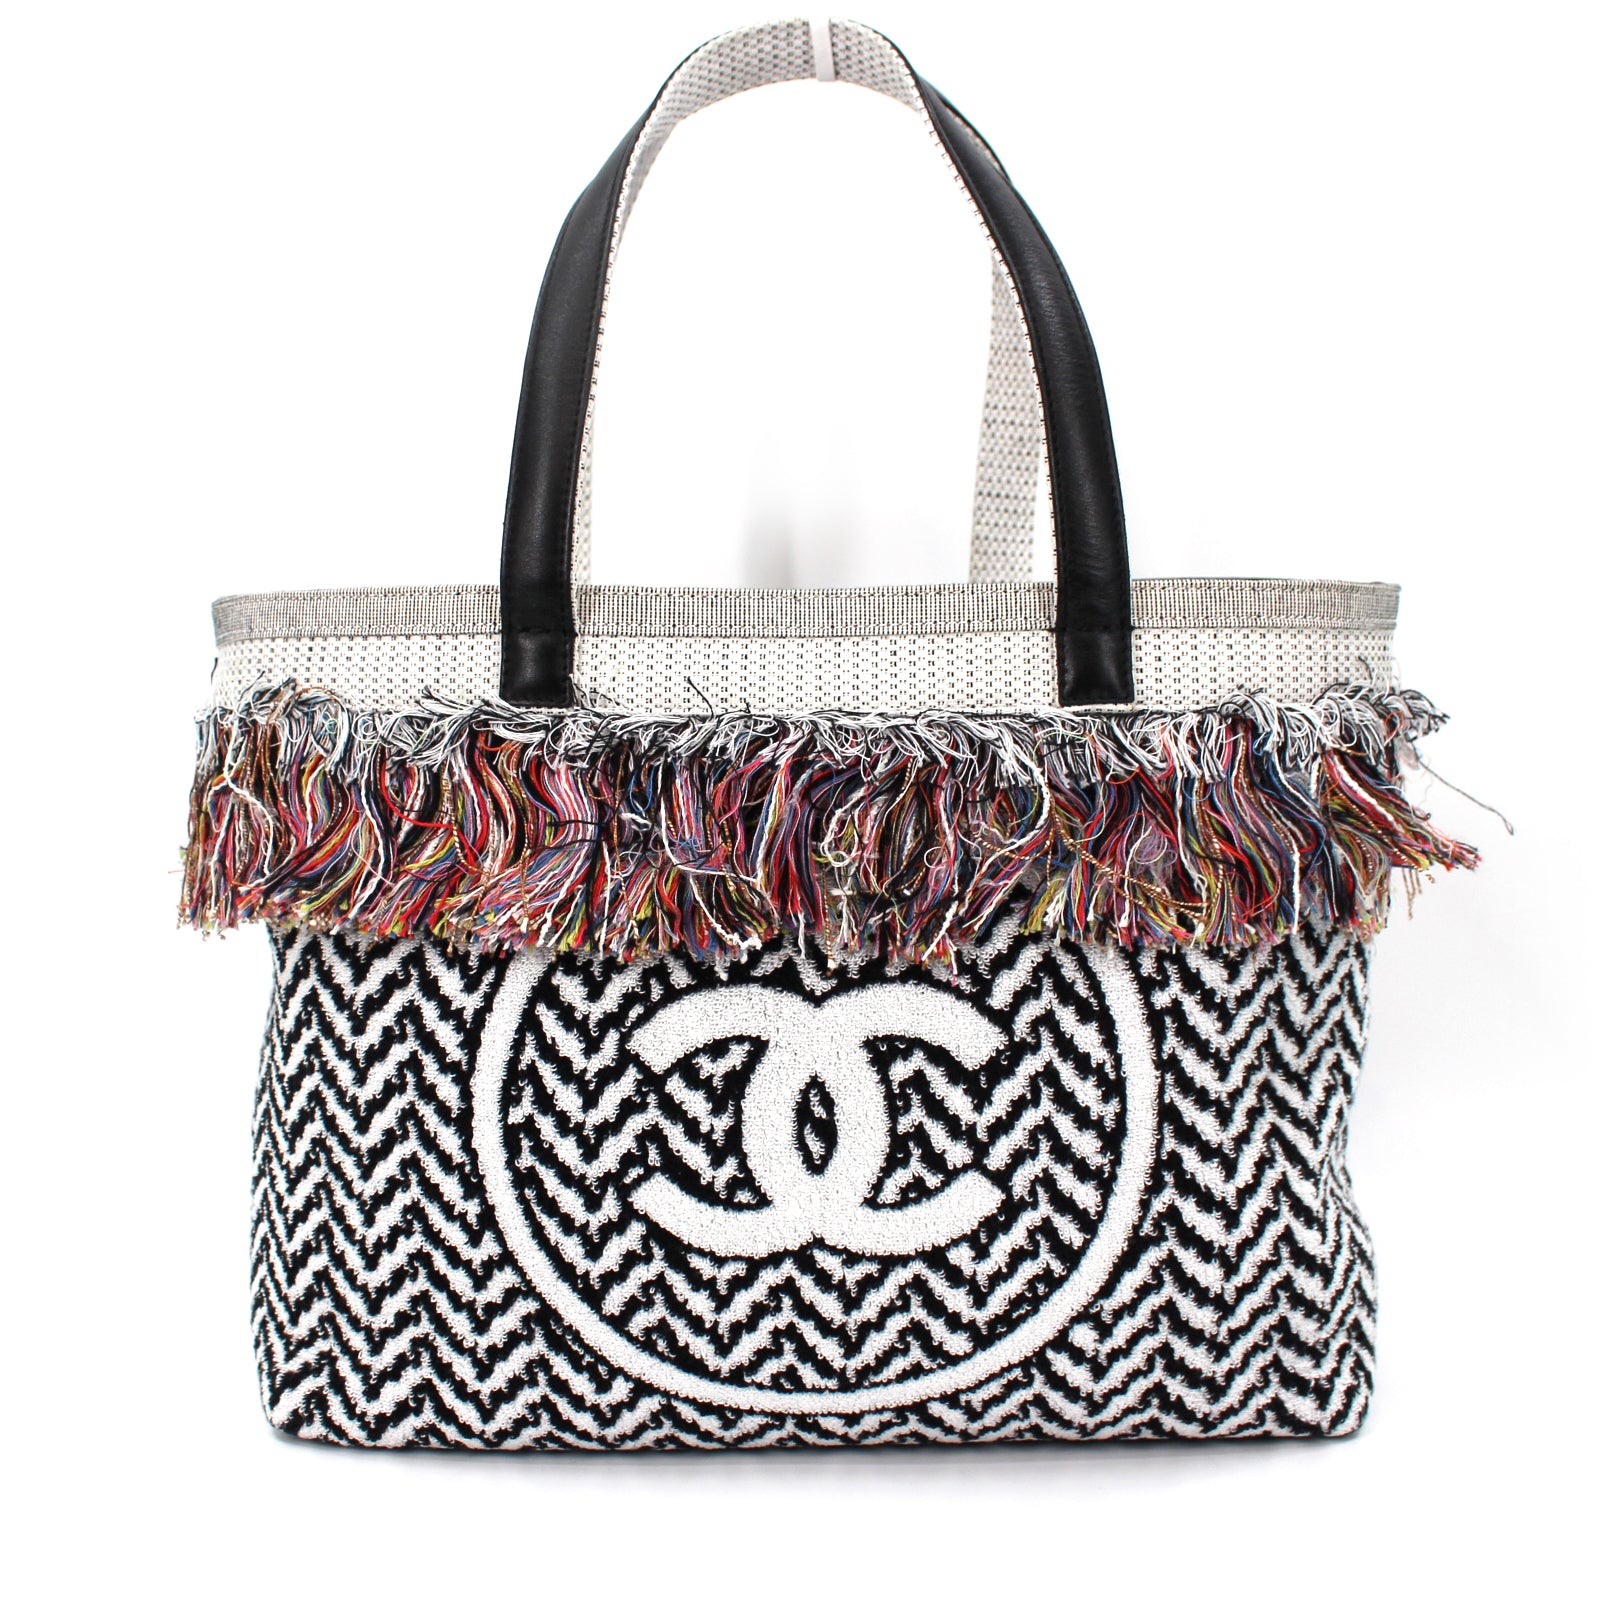 Chanel Black Cotton and Leather Camellia Terry Beach Tote w/ Towel